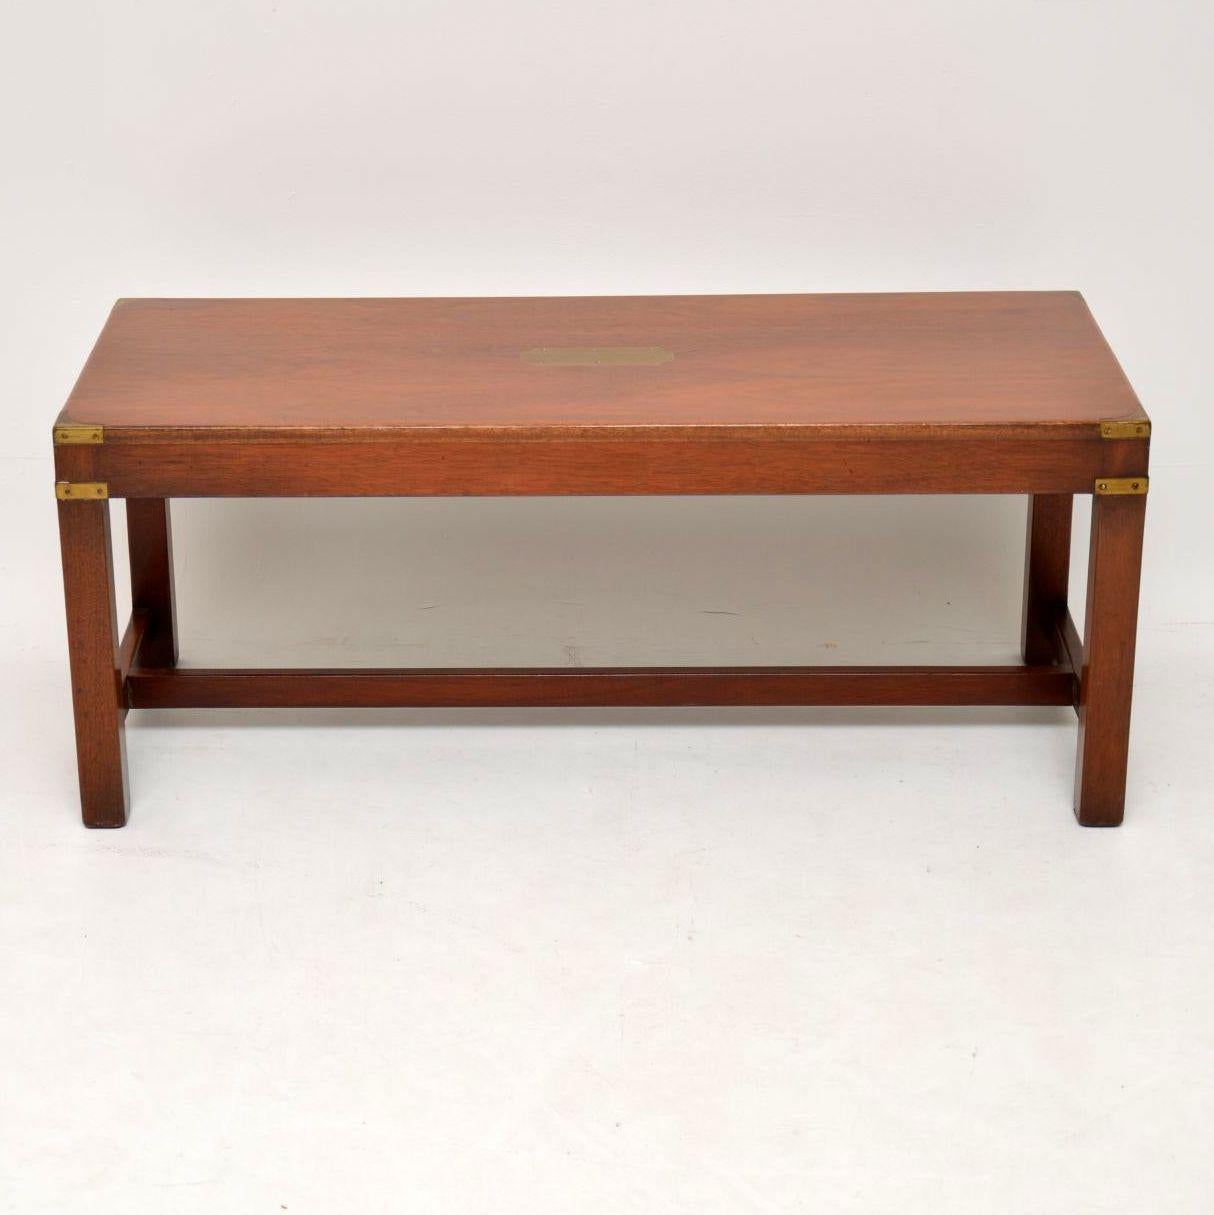 Antique Campaign style mahogany coffee table in excellent condition having just been French polished. It has a brass plaque on the top and military style corner fittings. This table is very well constructed with strong legs joined by cross